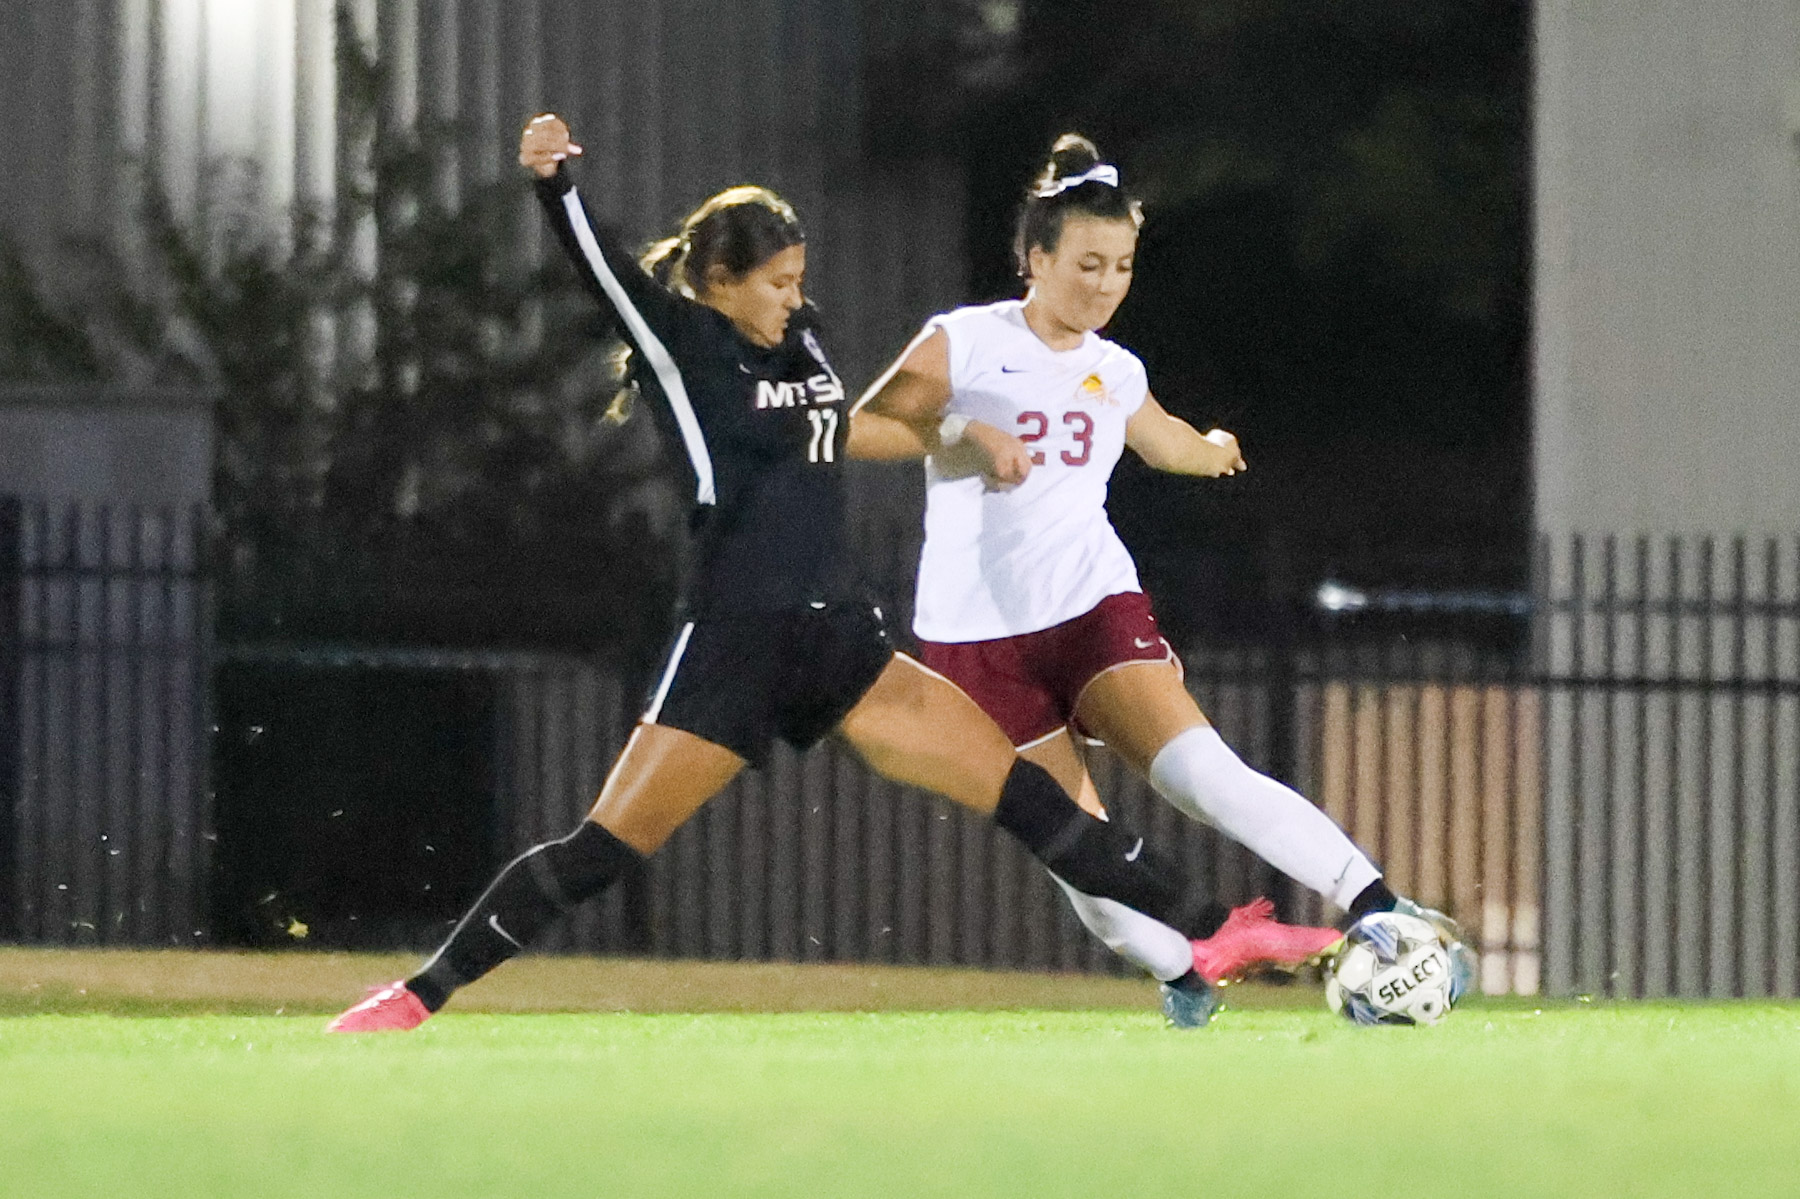 Angie Grigoryan in action at Mt. SAC in team's game on Nov. 7 in Walnut (photo by Richard Quinton).